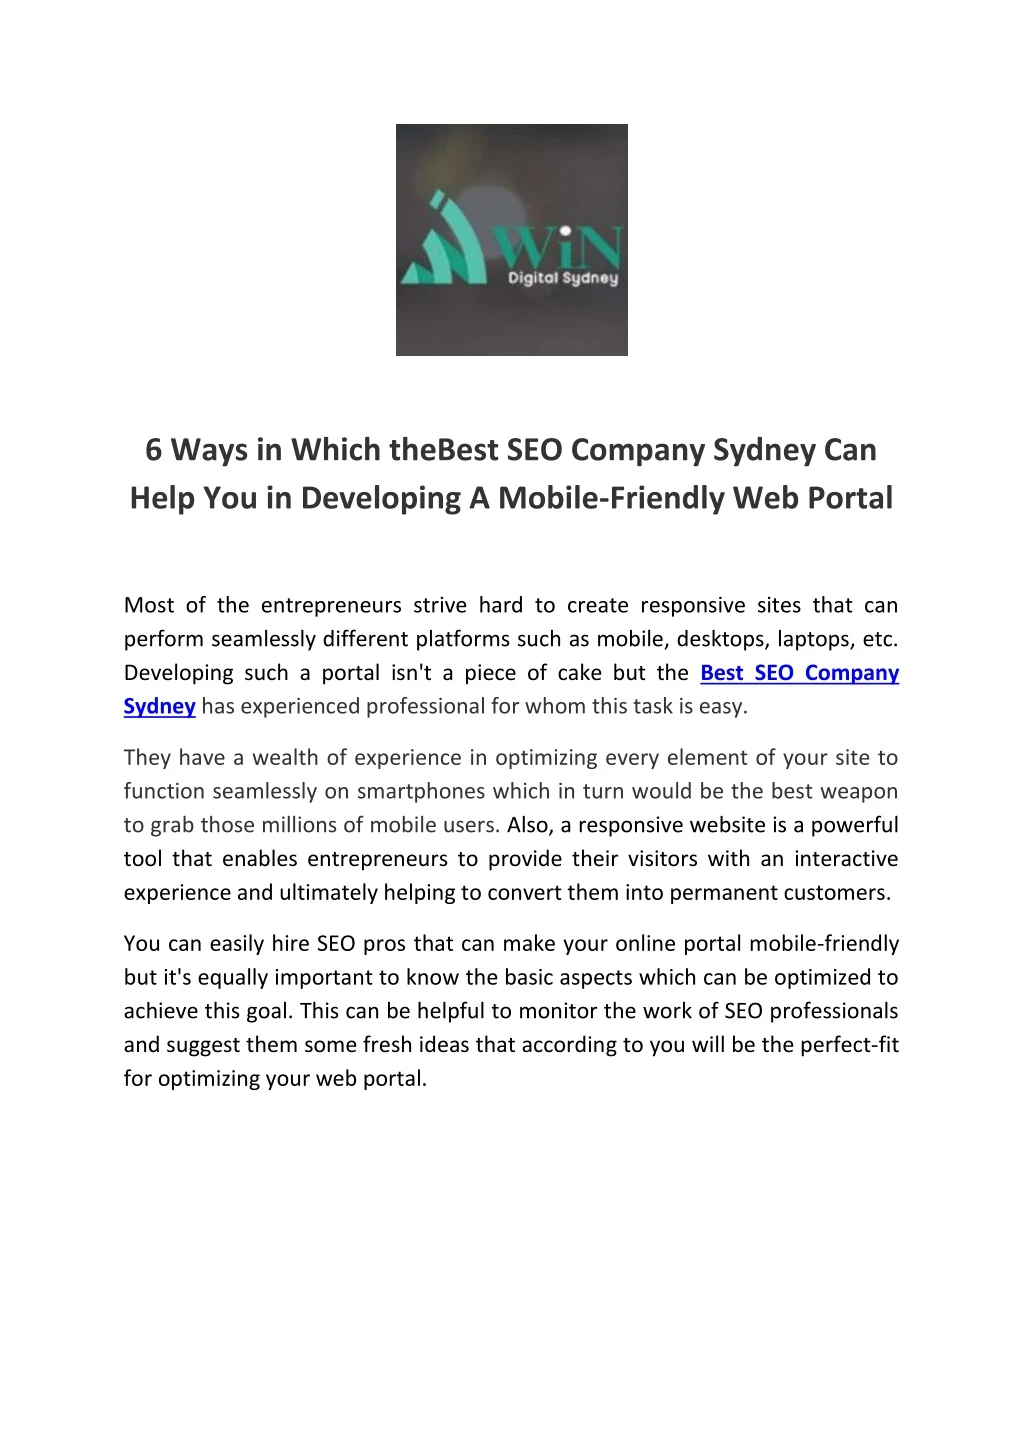 6 ways in which thebest seo company sydney